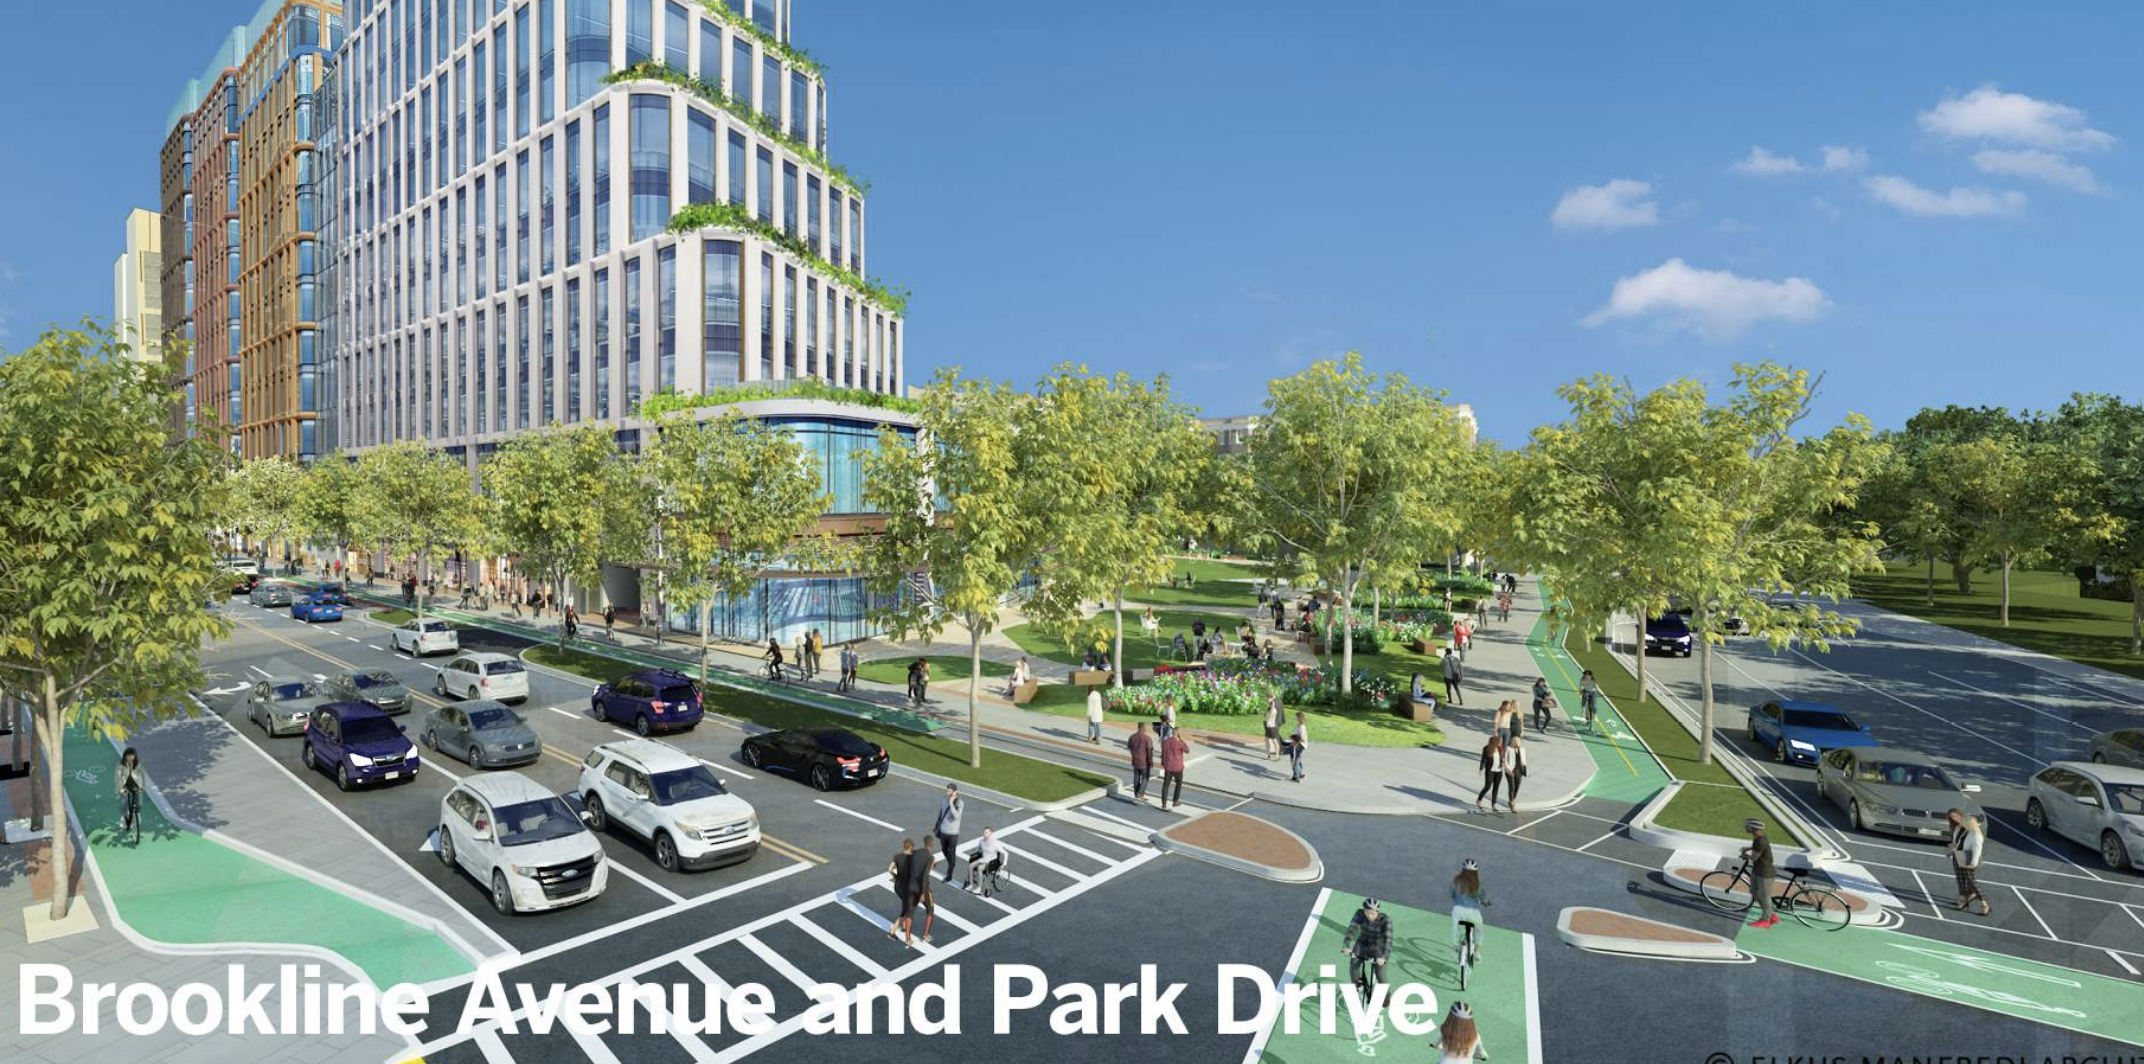 A rendering of a proposed high-rise lab building on Brookline Avenue in the Fenway shows proposed new two-way bike paths (lower right) that would provide a protected connection between the Fenway neighborhood to Longwood, via Brookline Avenue, and to the Riverway. Courtesy of the BPDA.